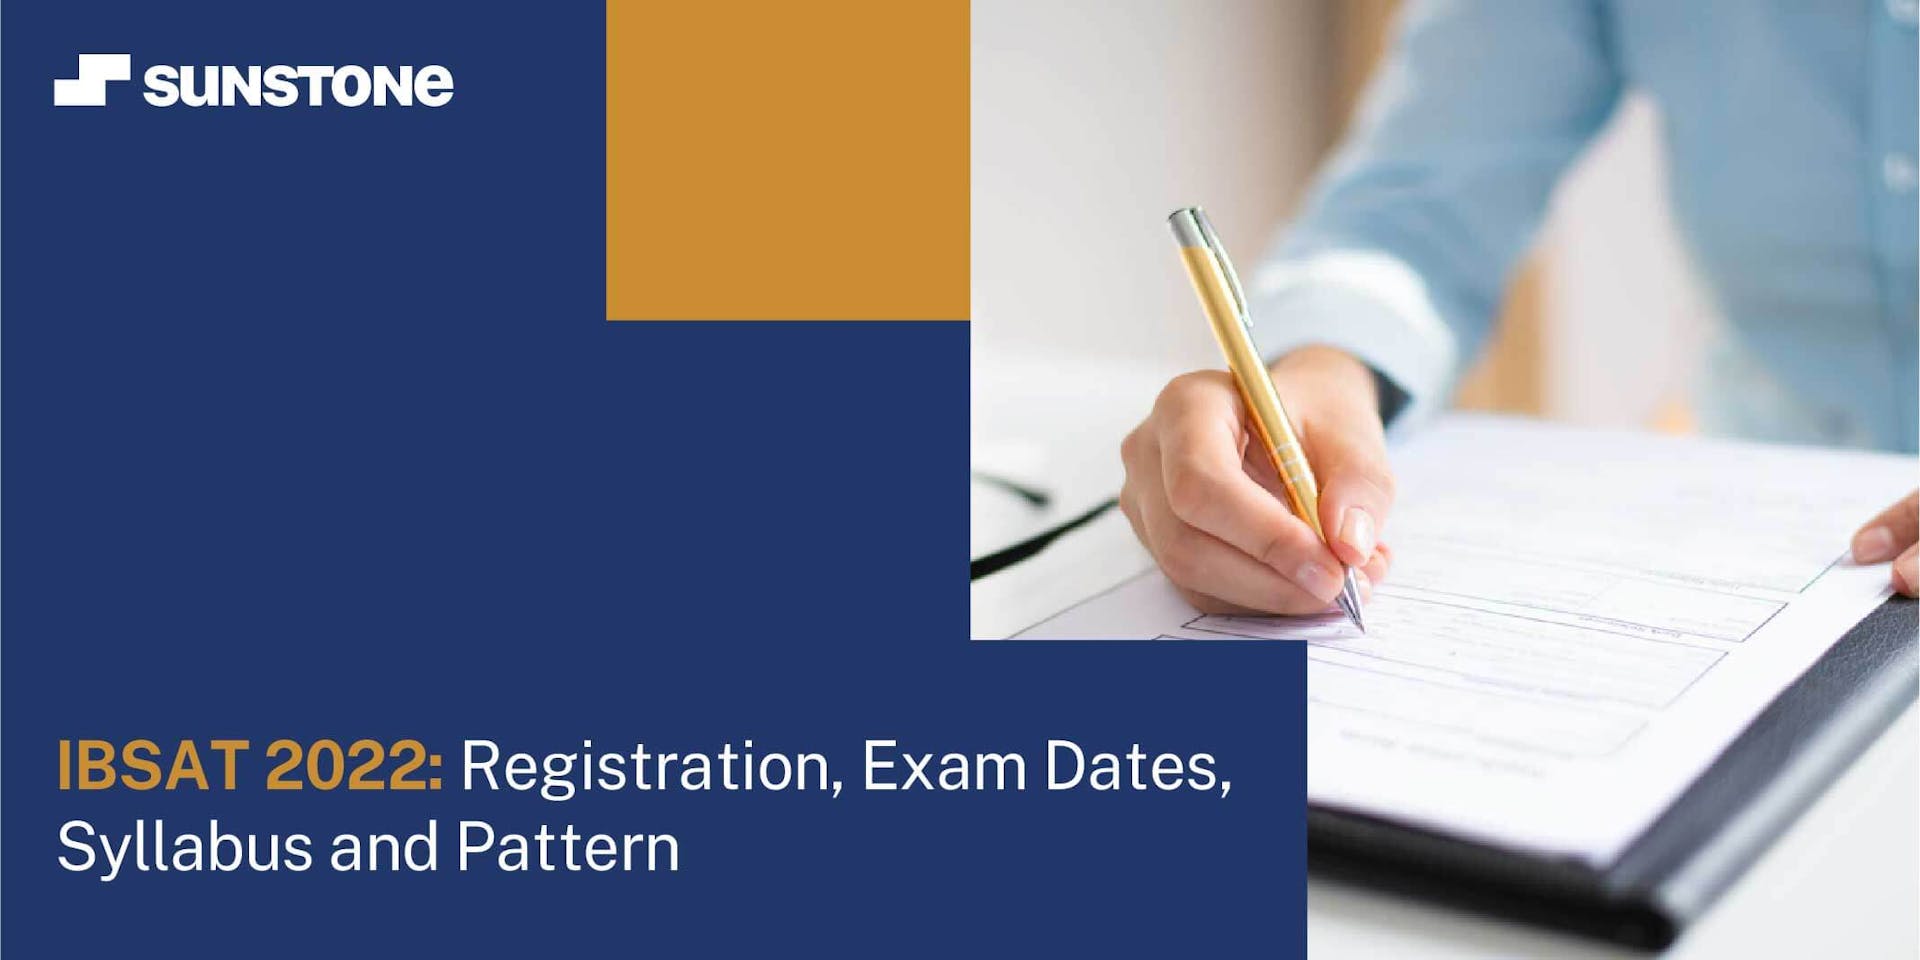 IBSAT 2022 exam, dates and syllabus